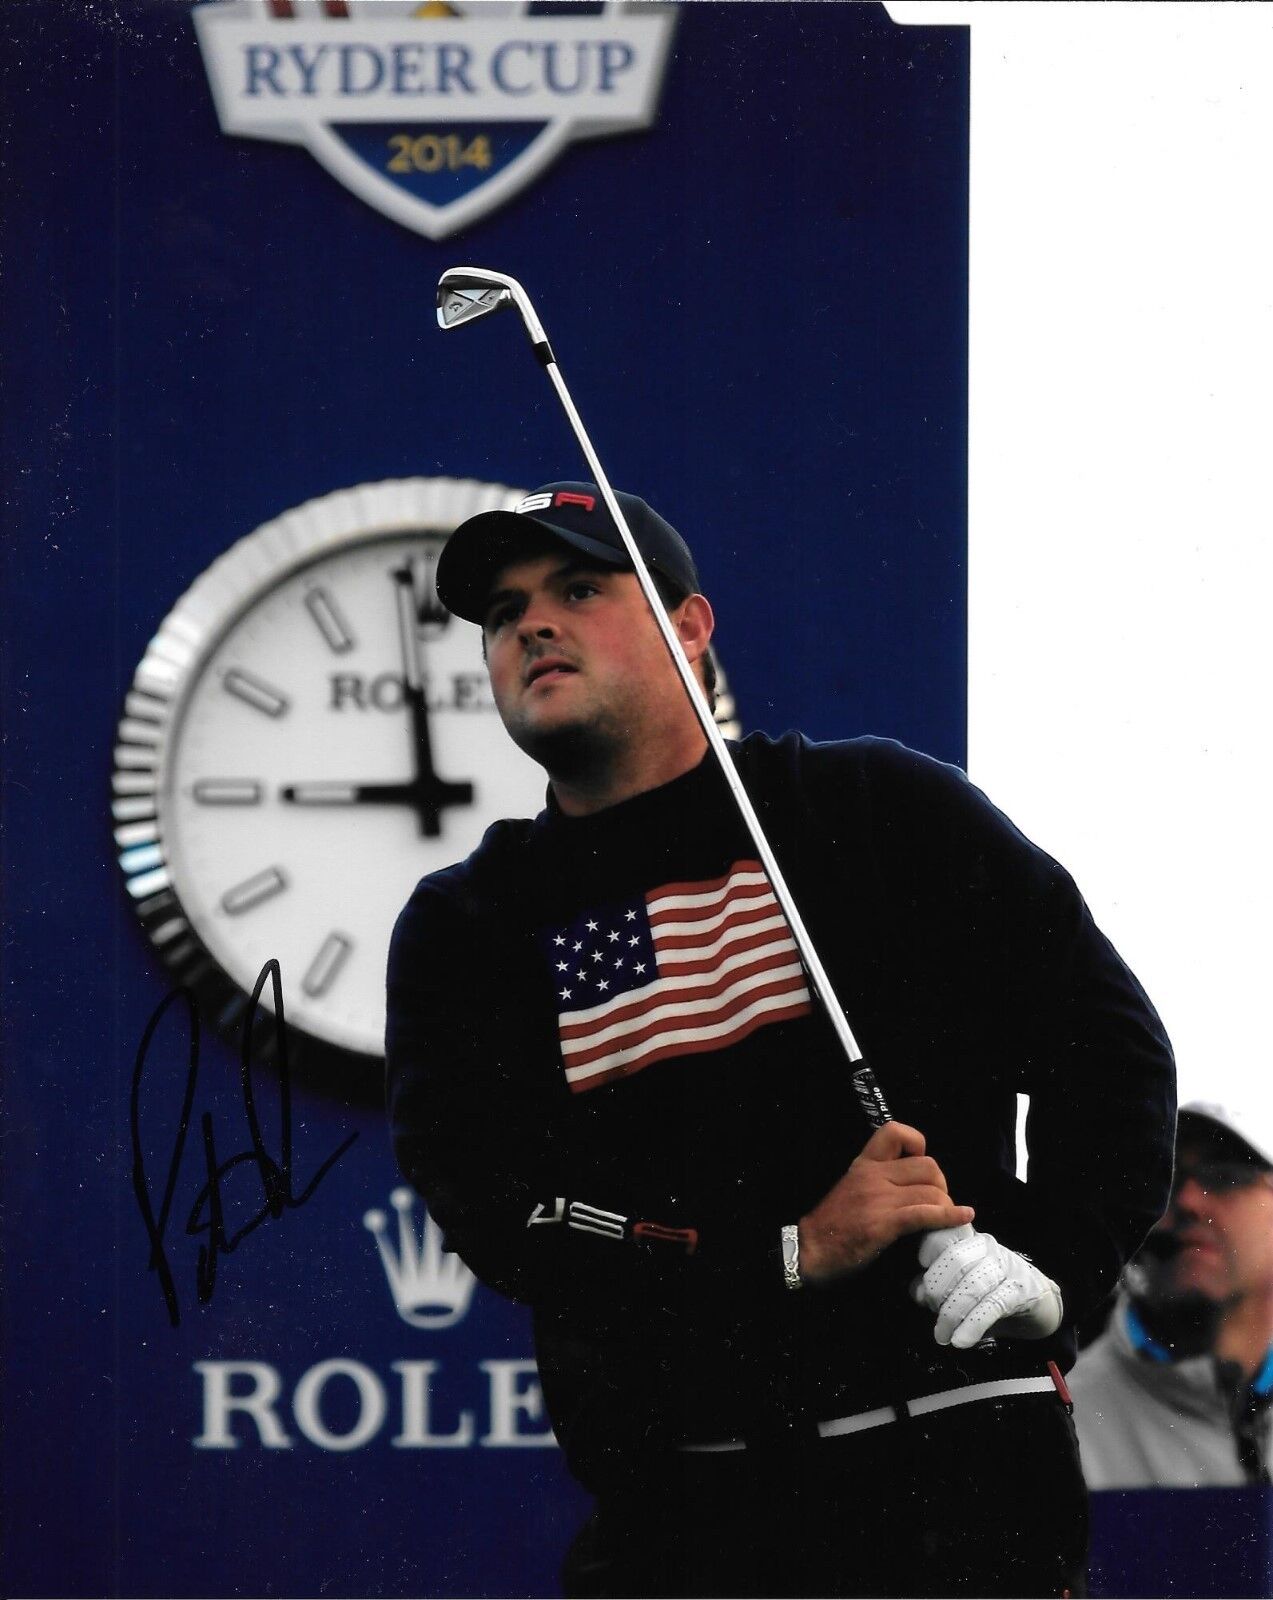 USA PATRICK REED HAND SIGNED RYDER CUP 8X10 Photo Poster painting W/COA